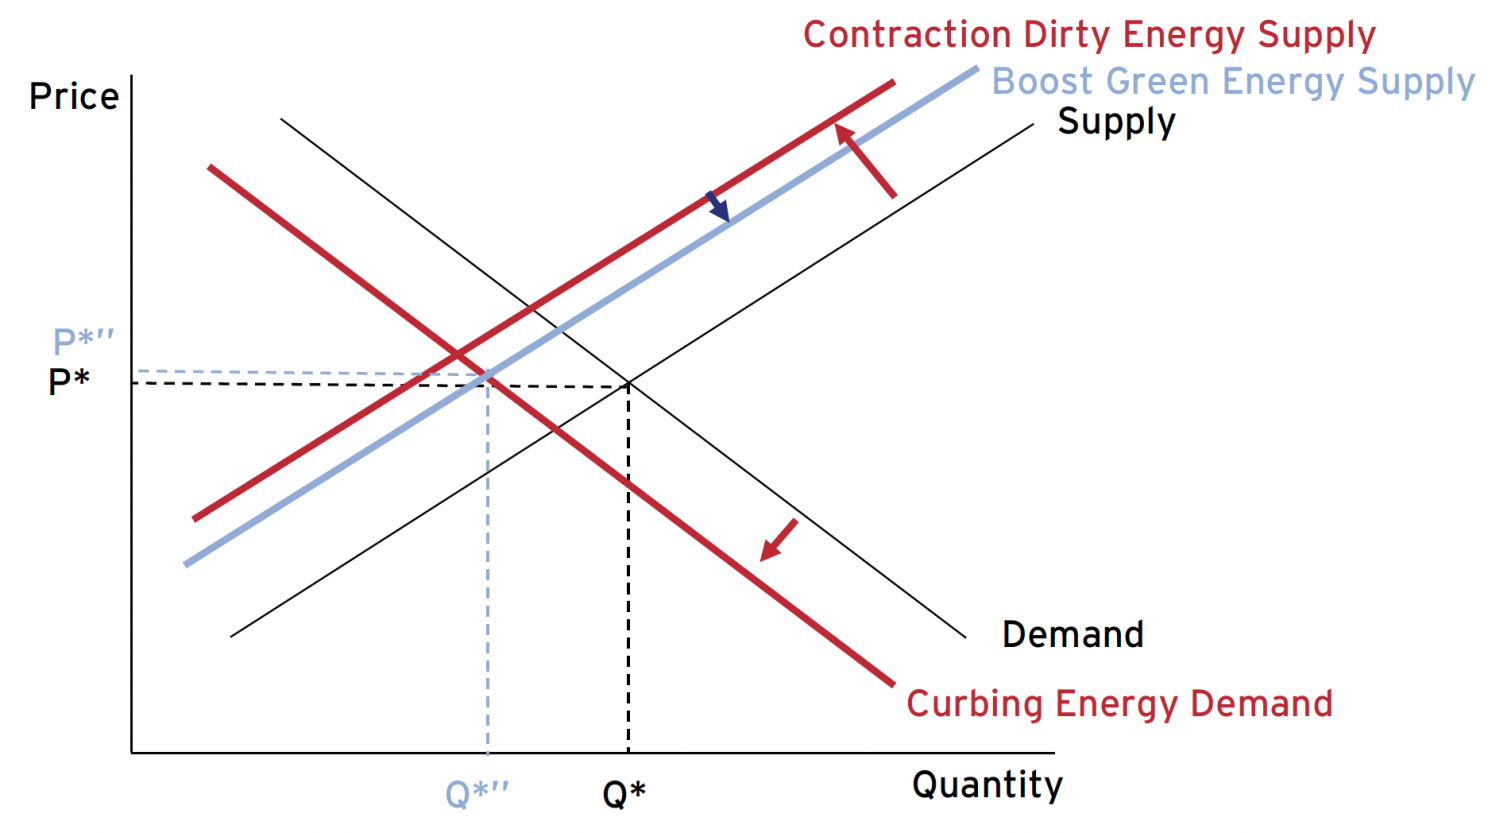 C) Contraction dirty energy supply, curbing energy demand and boosting green energy supply